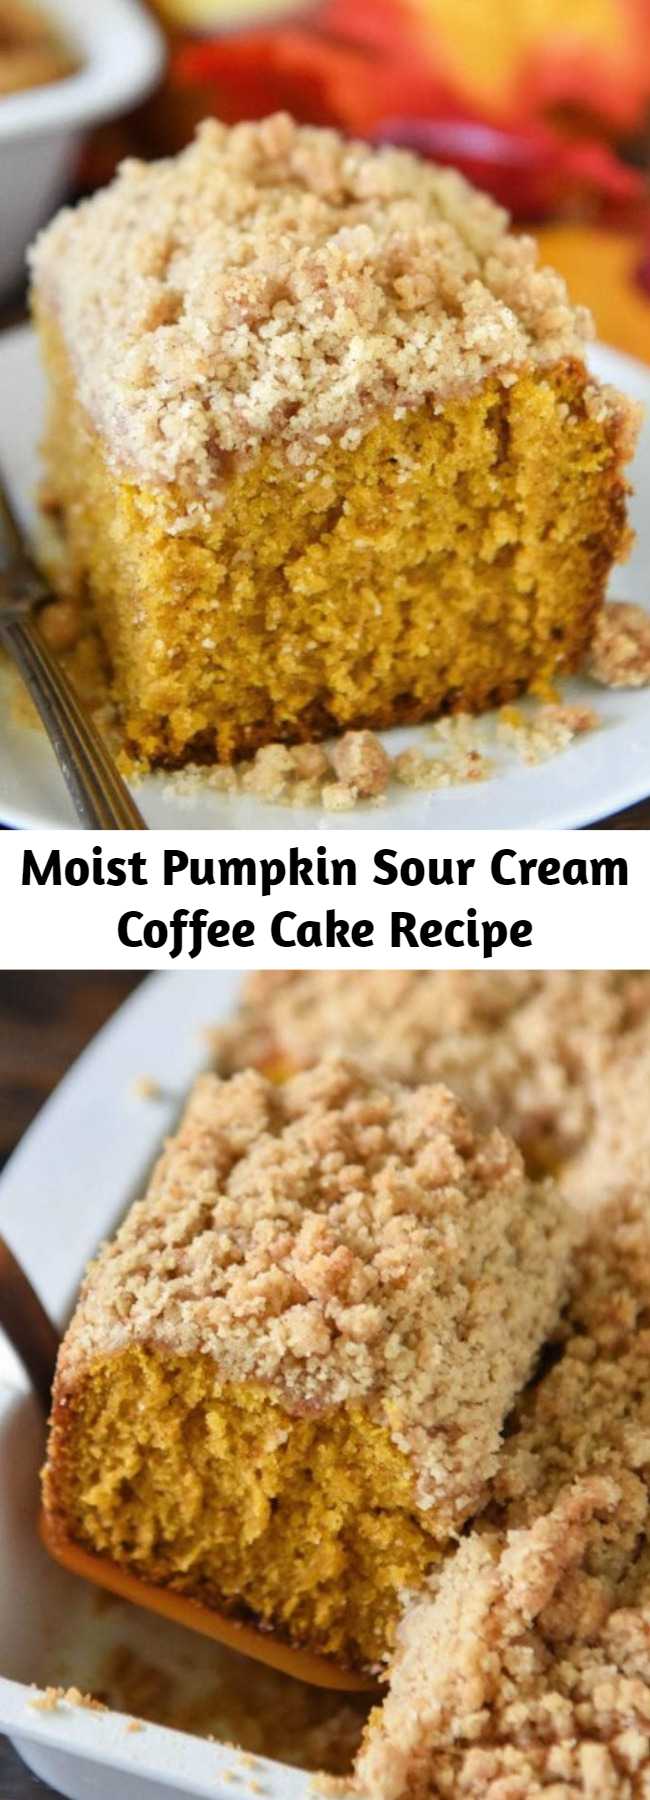 Moist Pumpkin Sour Cream Coffee Cake Recipe - Pumpkin Sour Cream Coffee Cake. An Extra Moist Pumpkin Spice Cake, Topped With a Cinnamon Crumb Topping, Makes a Perfect Fall Breakfast Coffee Cake or Dessert. #Pumpkin #CoffeeCake #Dessert #Cake